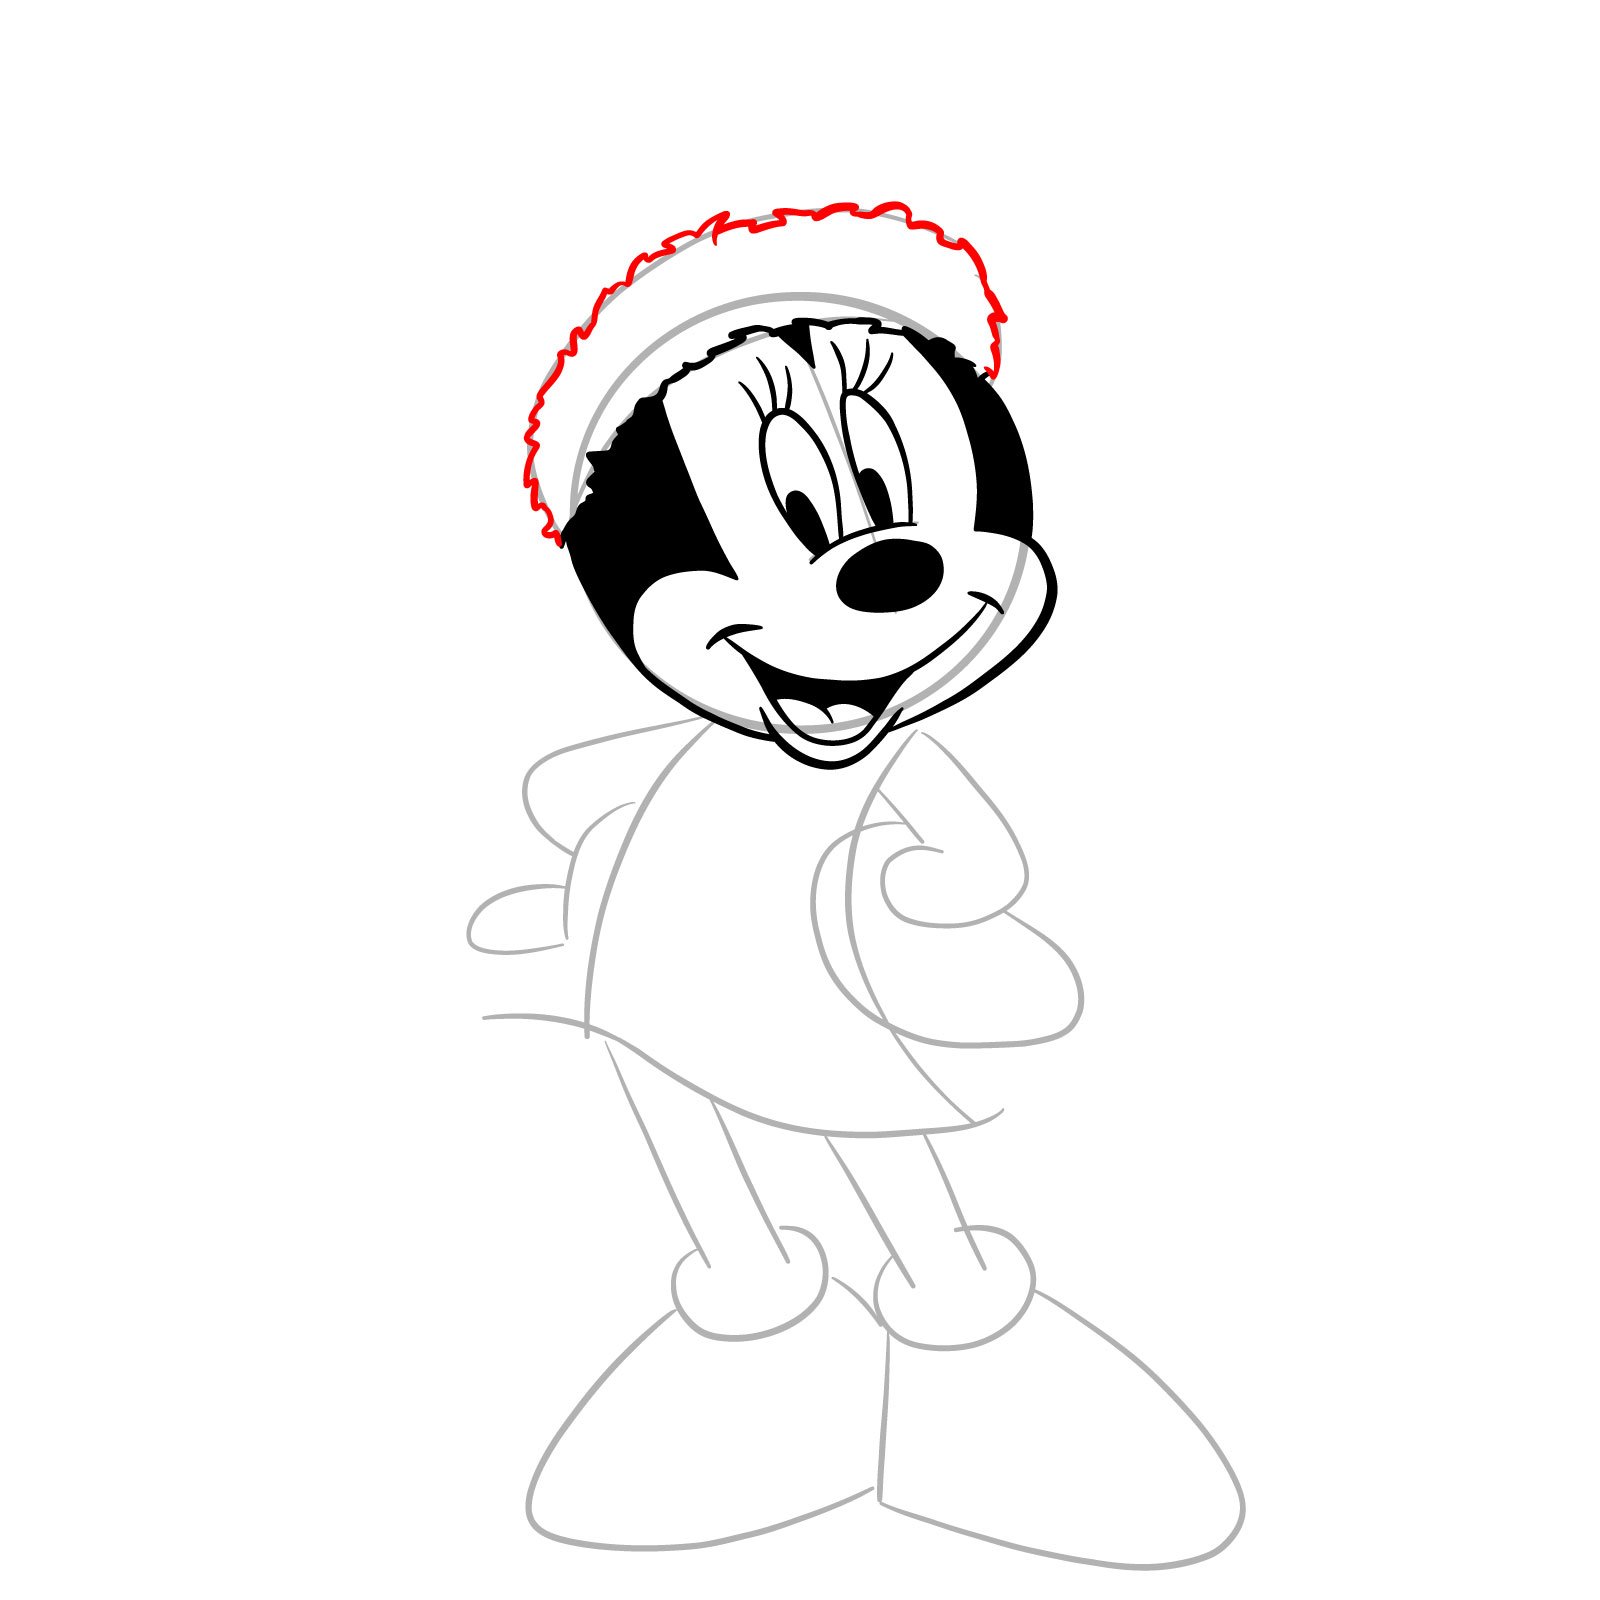 How to draw Minnie in a Christmas dress - step 13